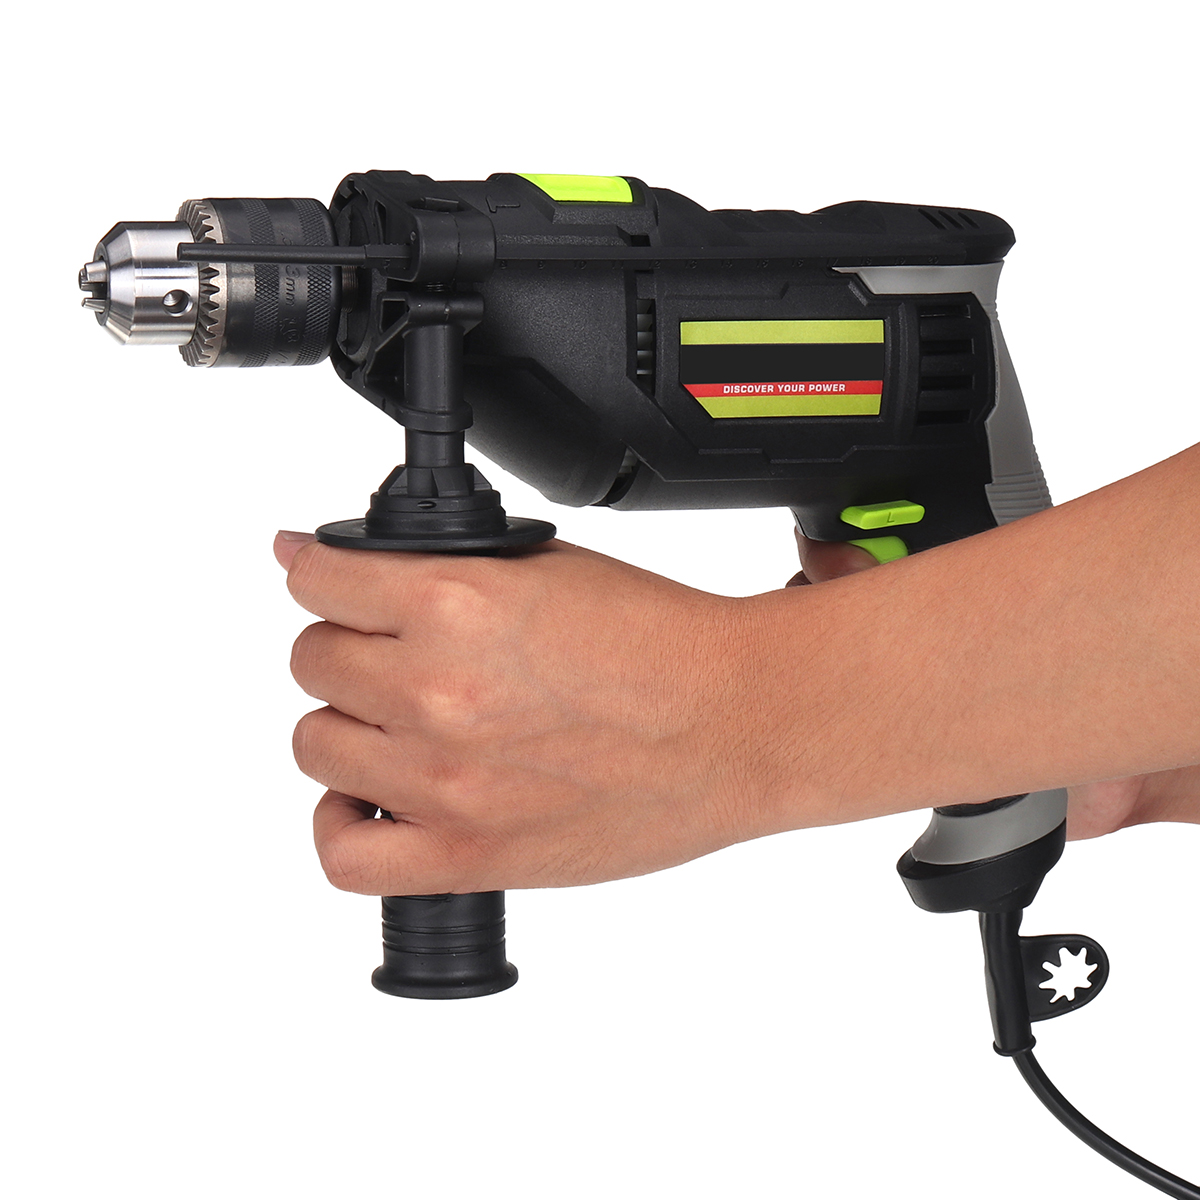 220V-710W-Electric-Impact-Drill-Rotary-Hammer-Concrete-Punch-Chisel-Driver-Hand-Tools-1736353-12